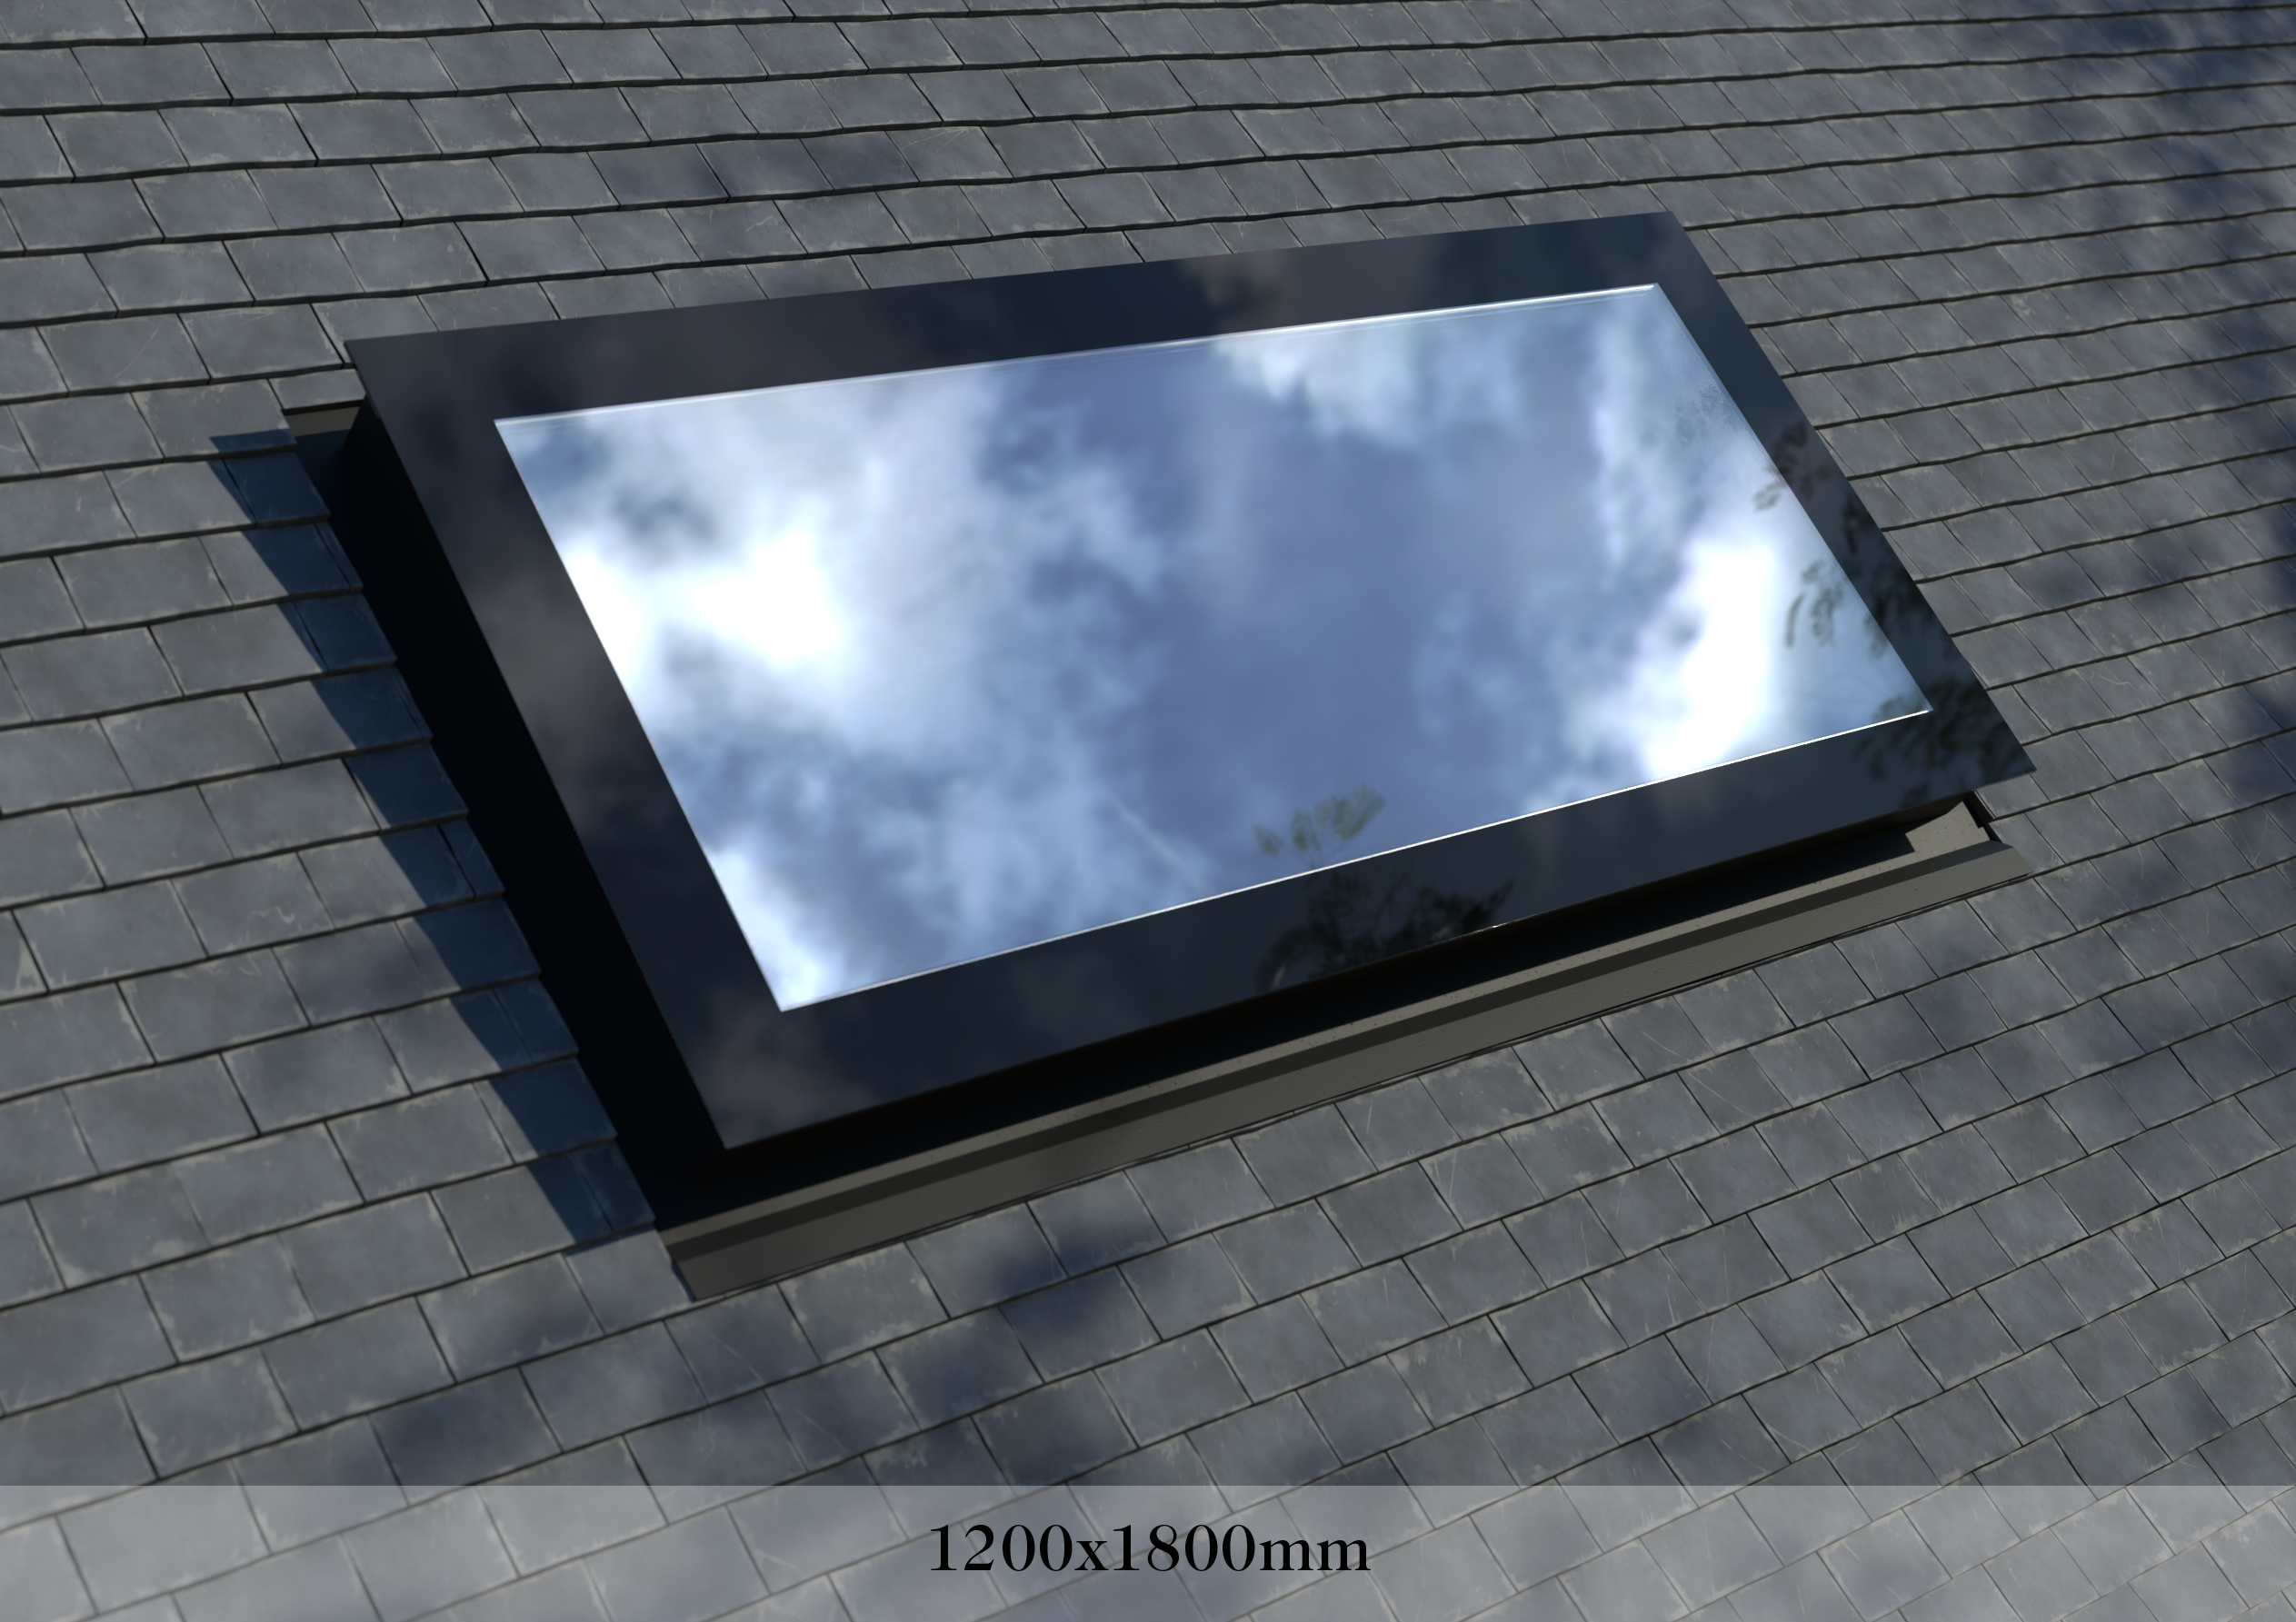 Pitched Roof Skylight 1200 x 1800mm